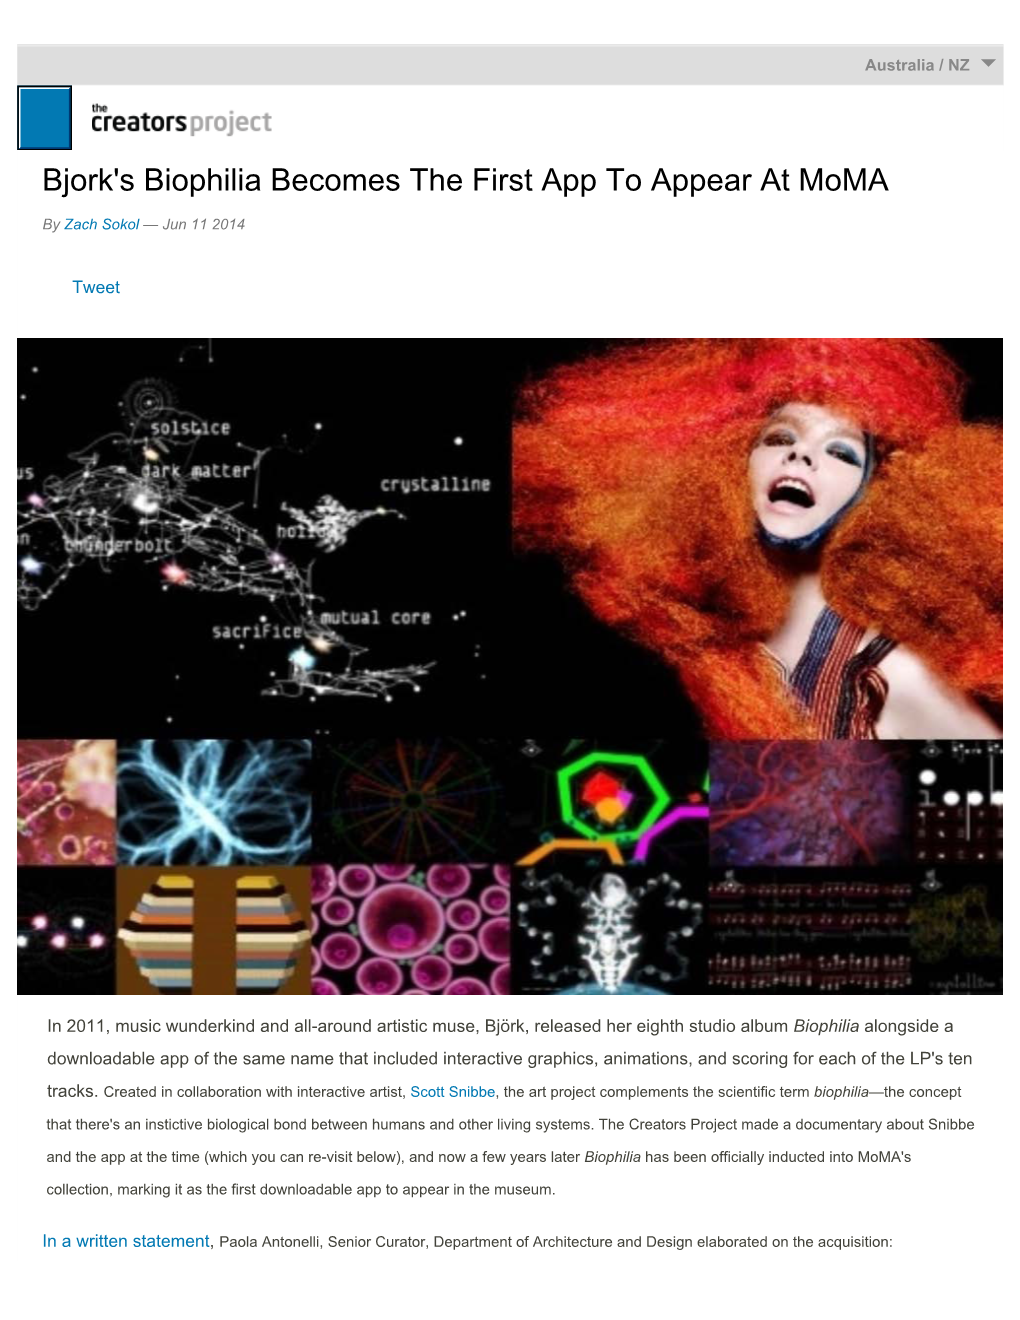 Bjork's Biophilia Becomes the First App to Appear at Moma